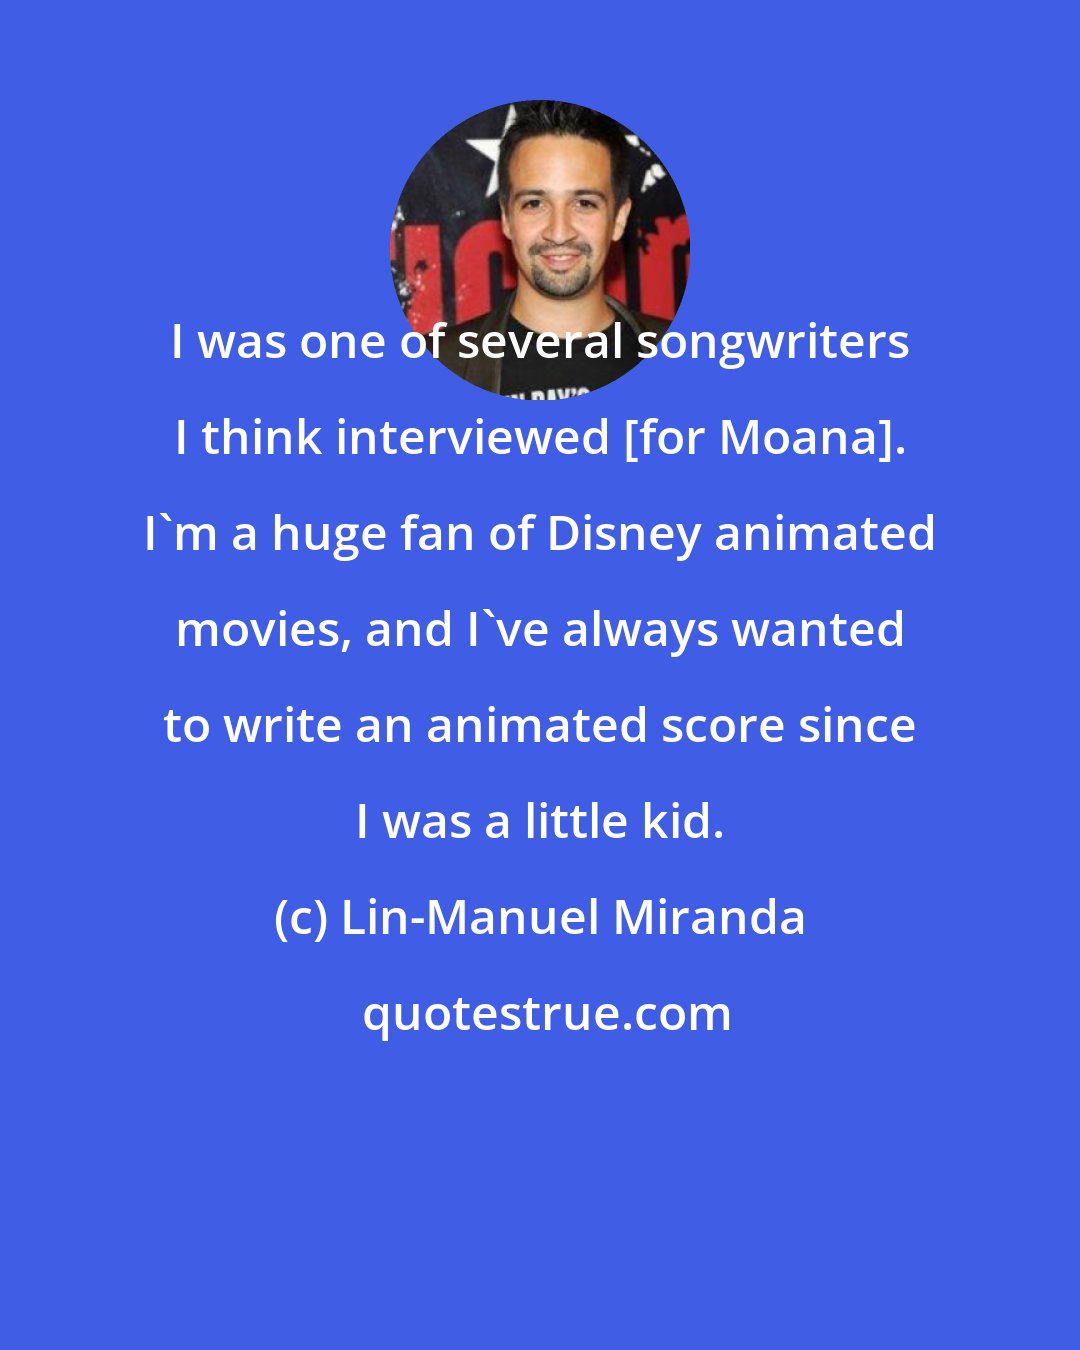 Lin-Manuel Miranda: I was one of several songwriters I think interviewed [for Moana]. I'm a huge fan of Disney animated movies, and I've always wanted to write an animated score since I was a little kid.